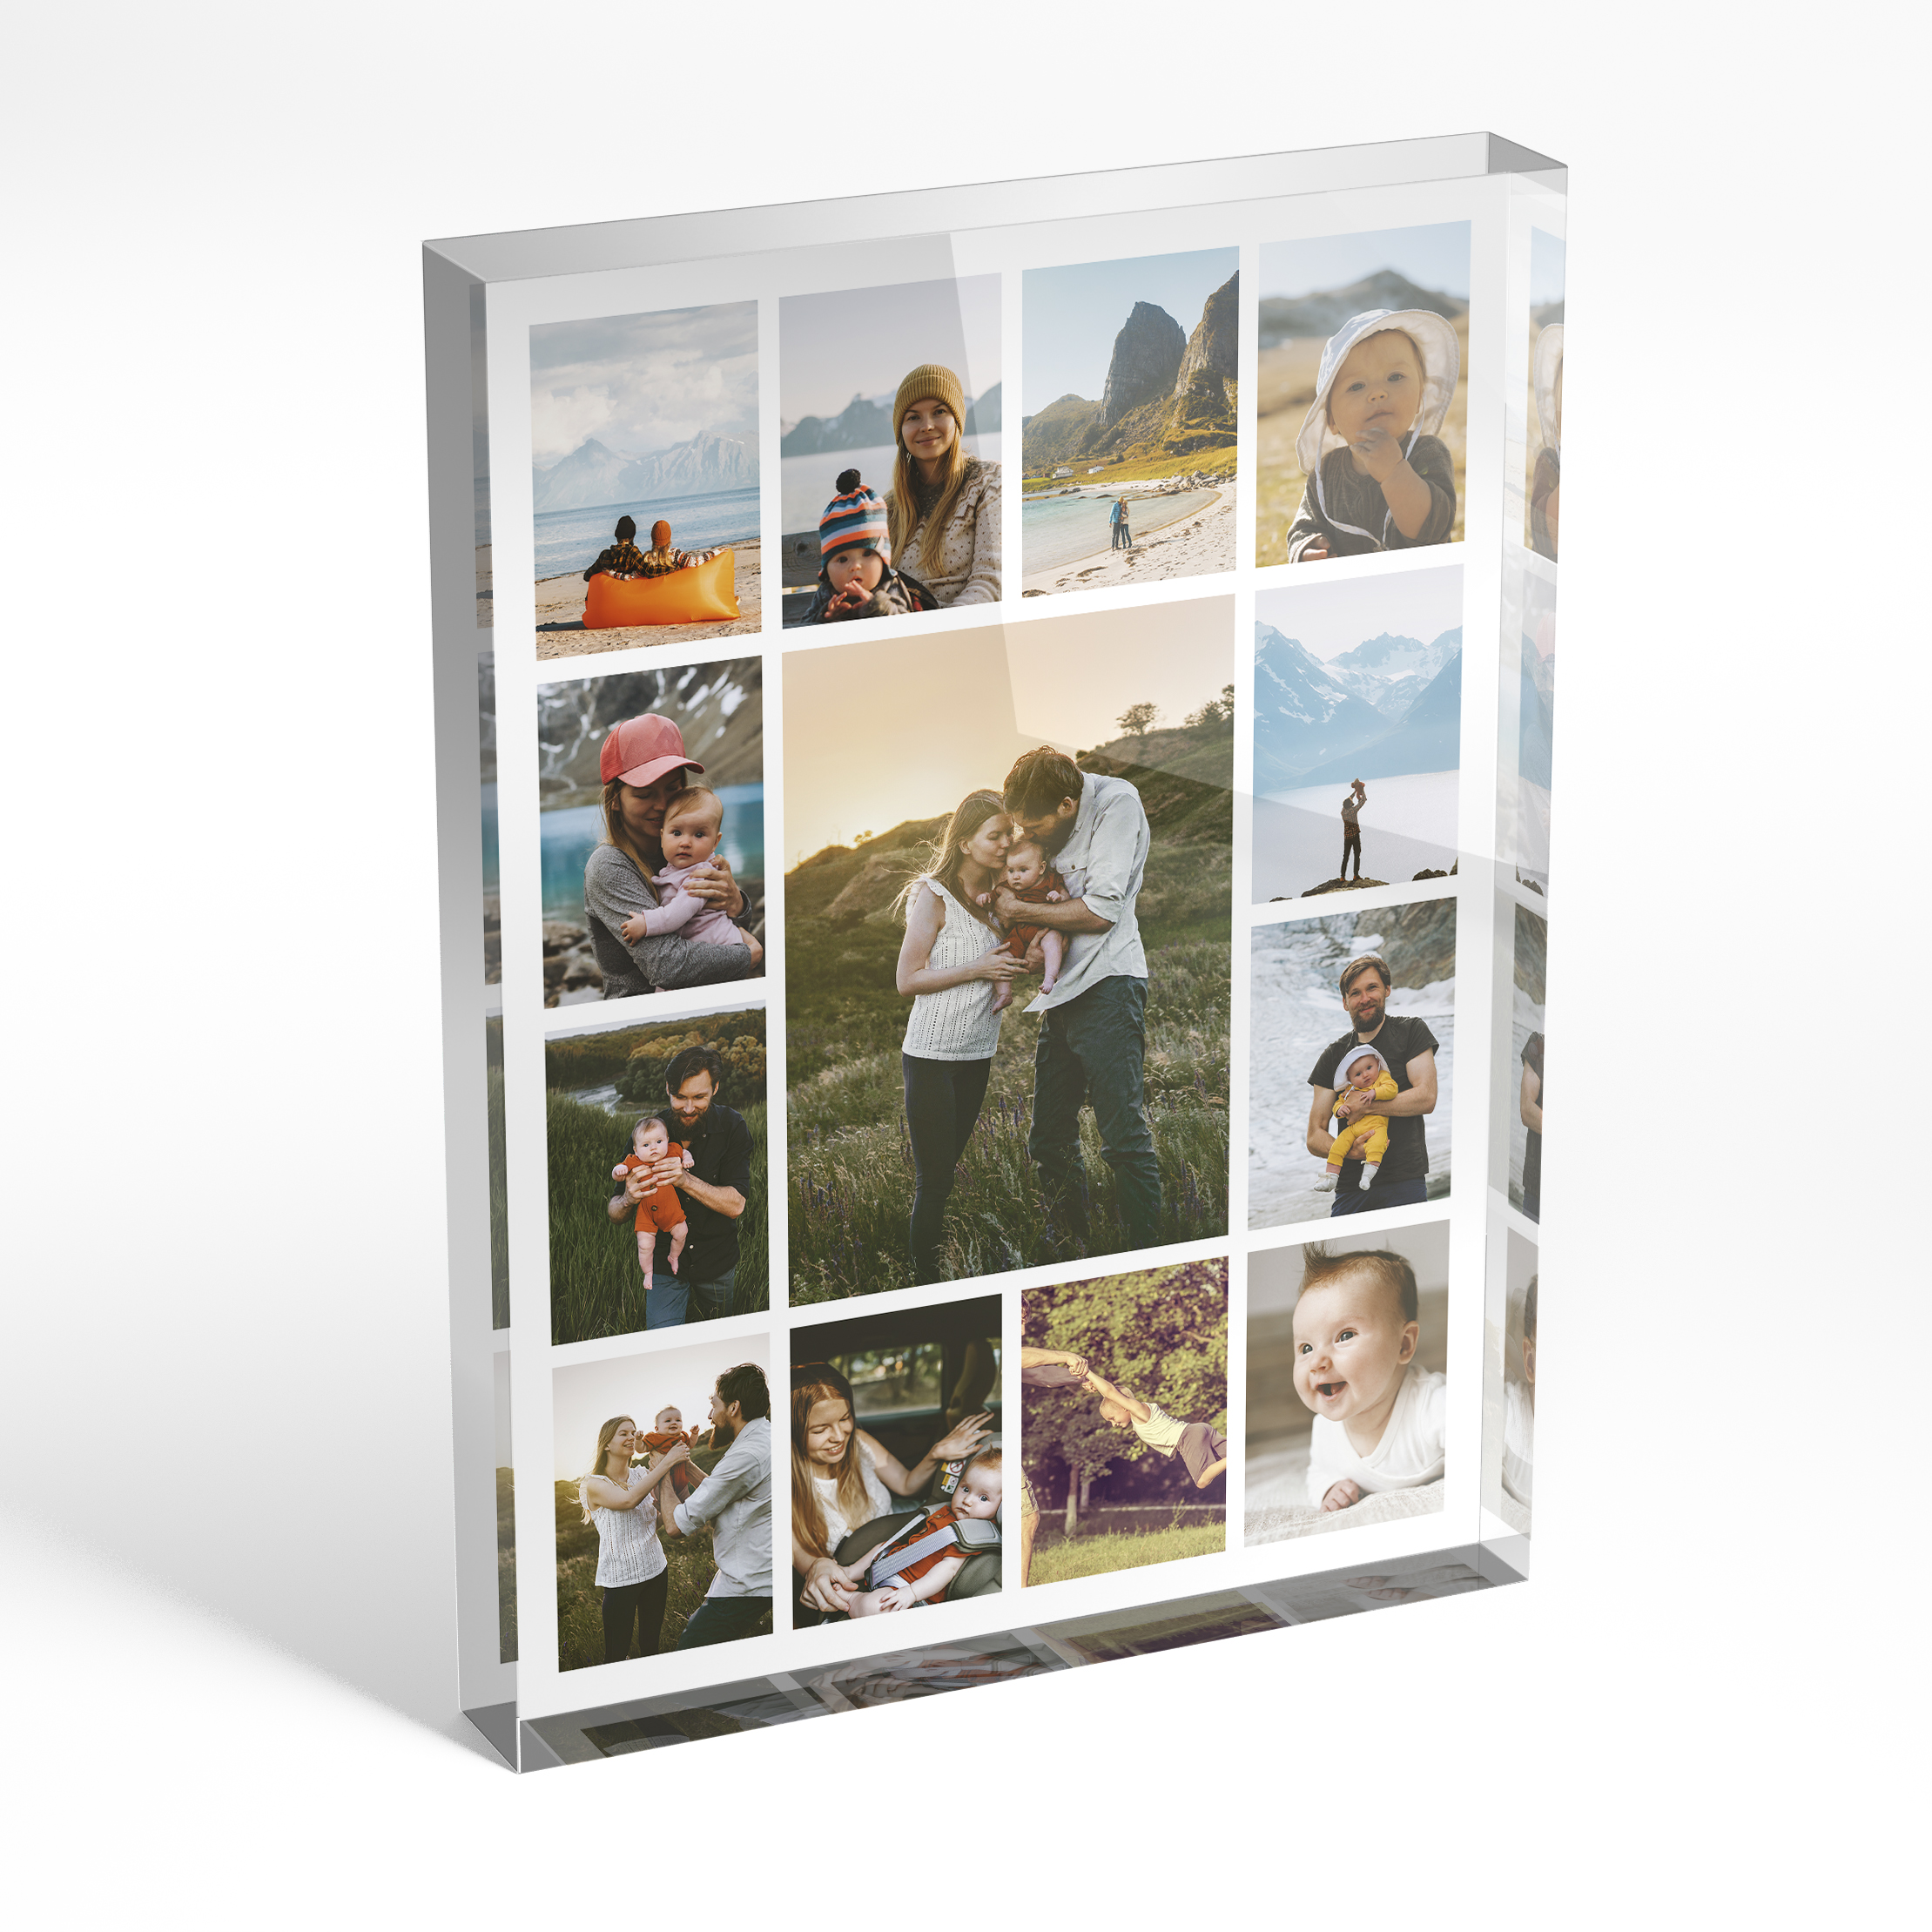 A front side view of a portrait layout Perspex Photo Blocks with space for 10+ photos. Thiis design is named 'Melody of Memories'. 